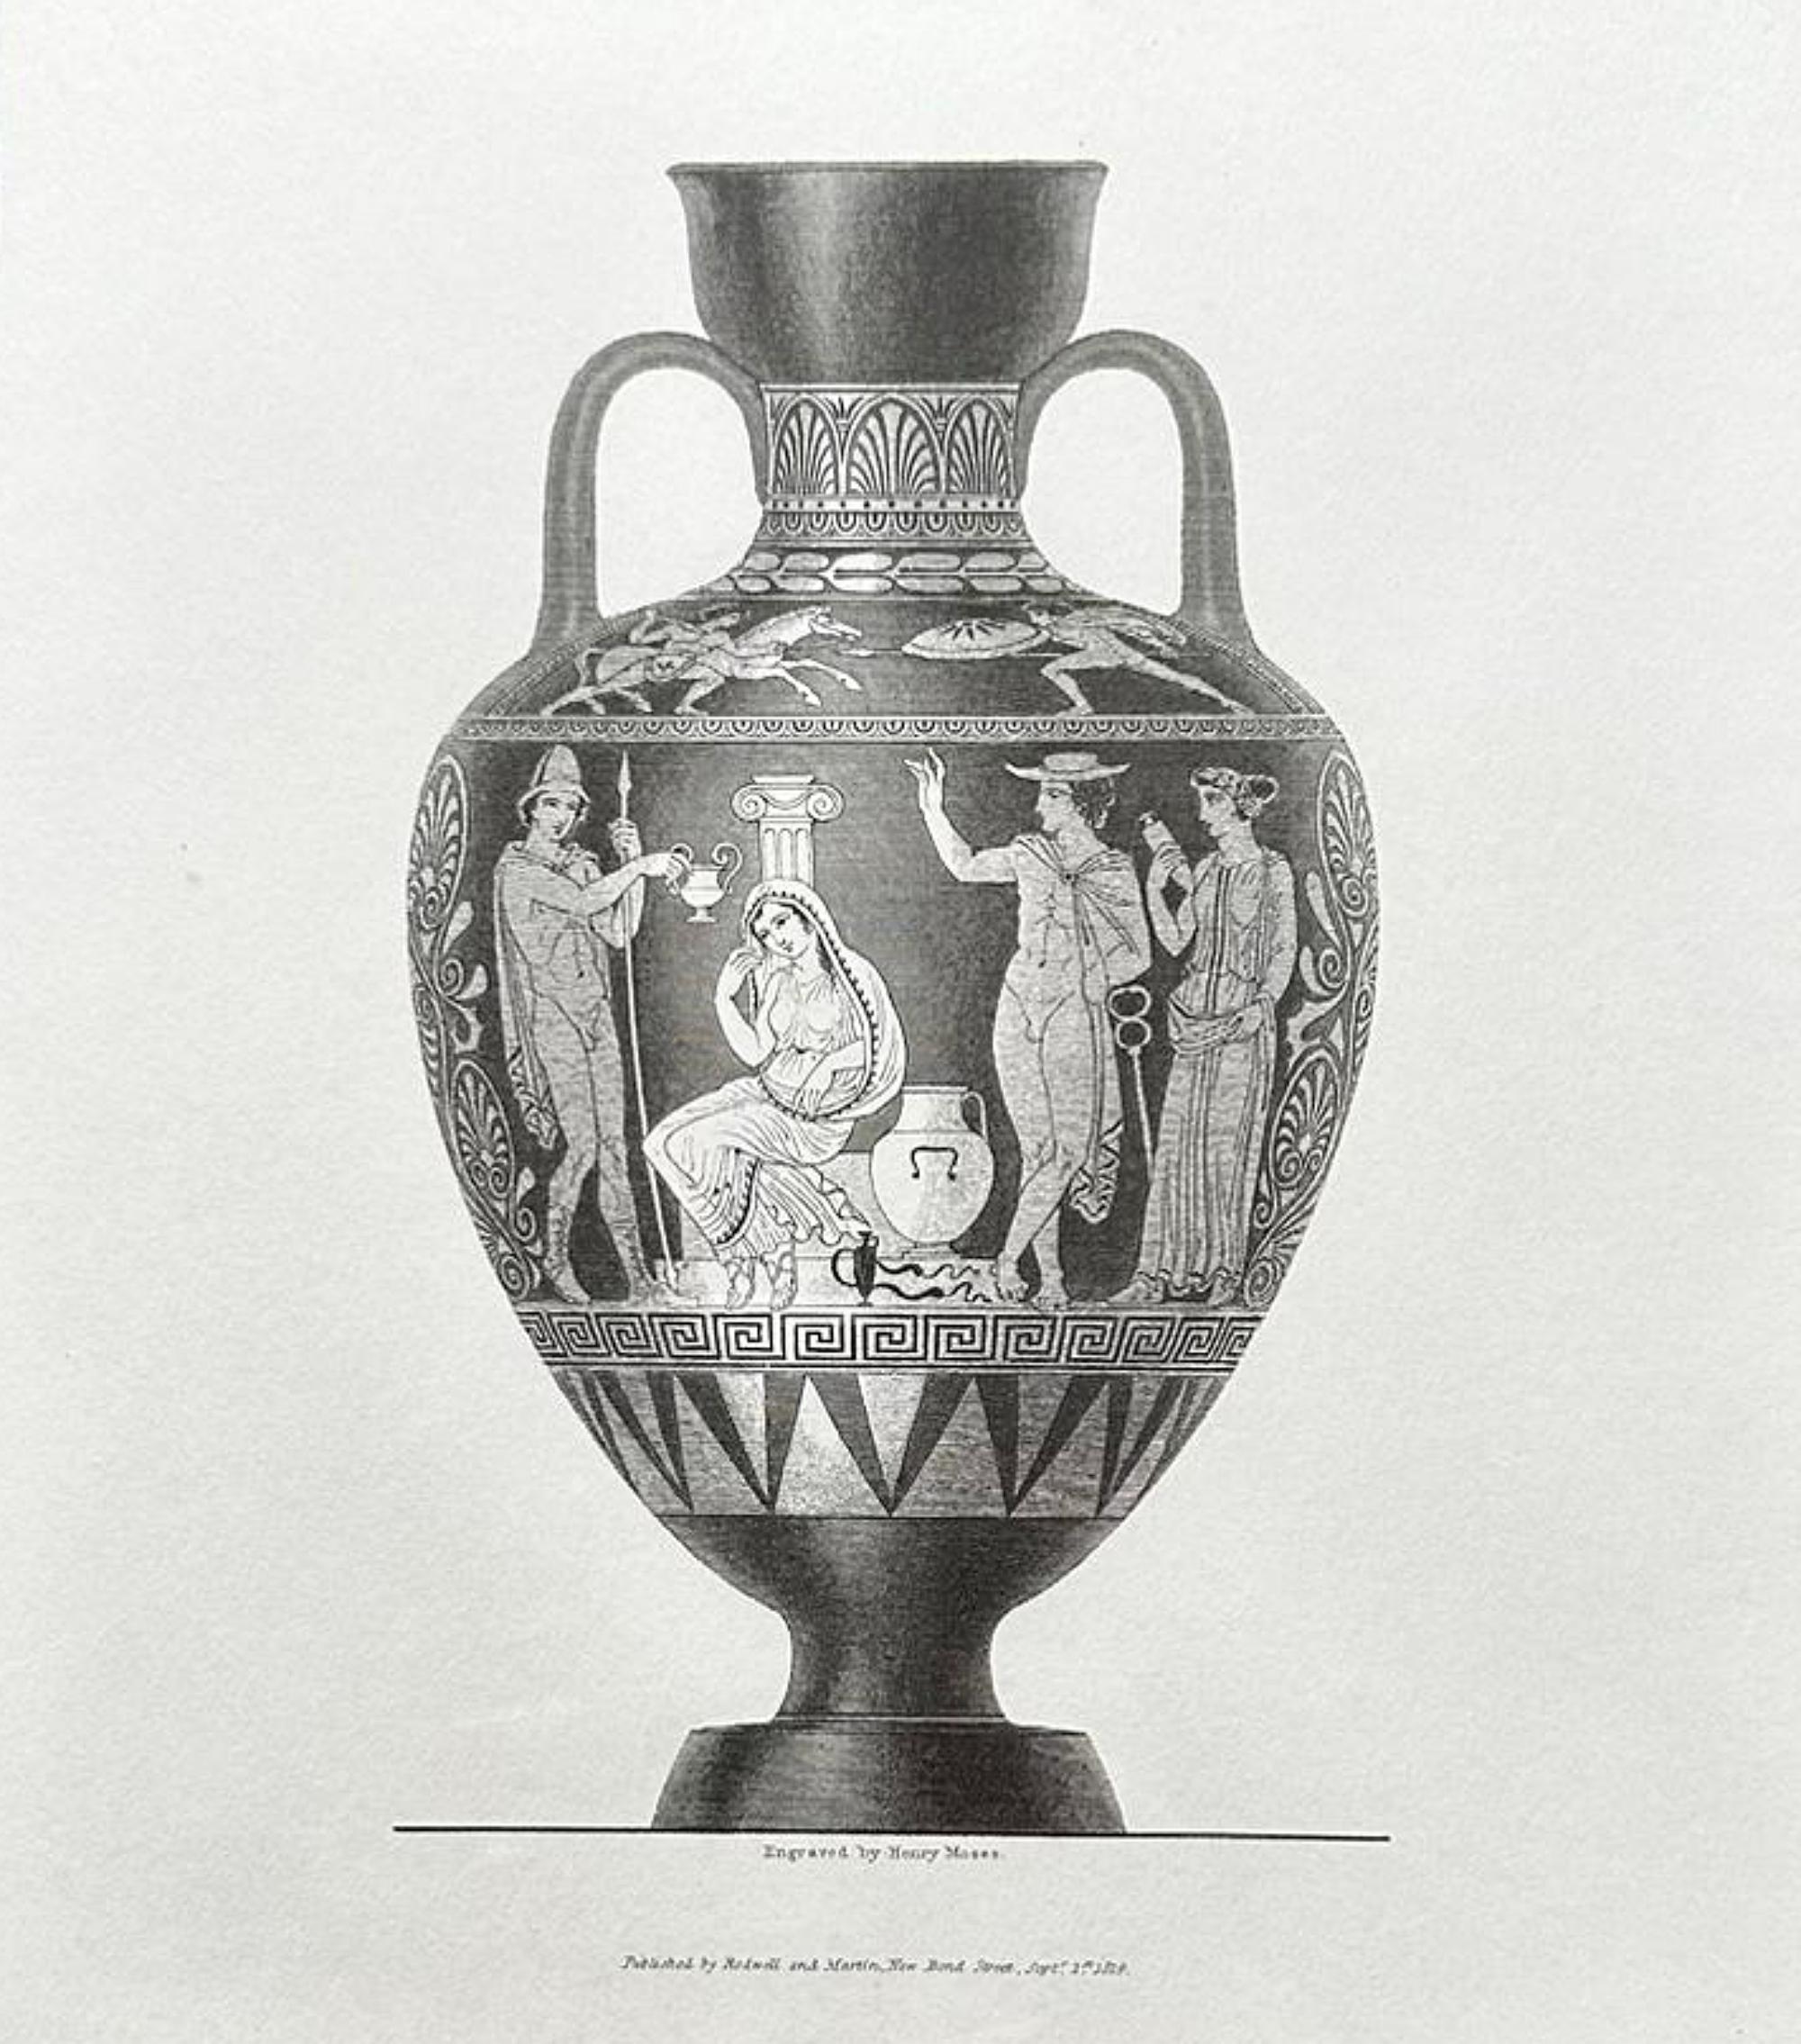 Set of 4 paintings (Engravings) of 20th Century Greek vases
39cm x 36cm
perfect condition, new.